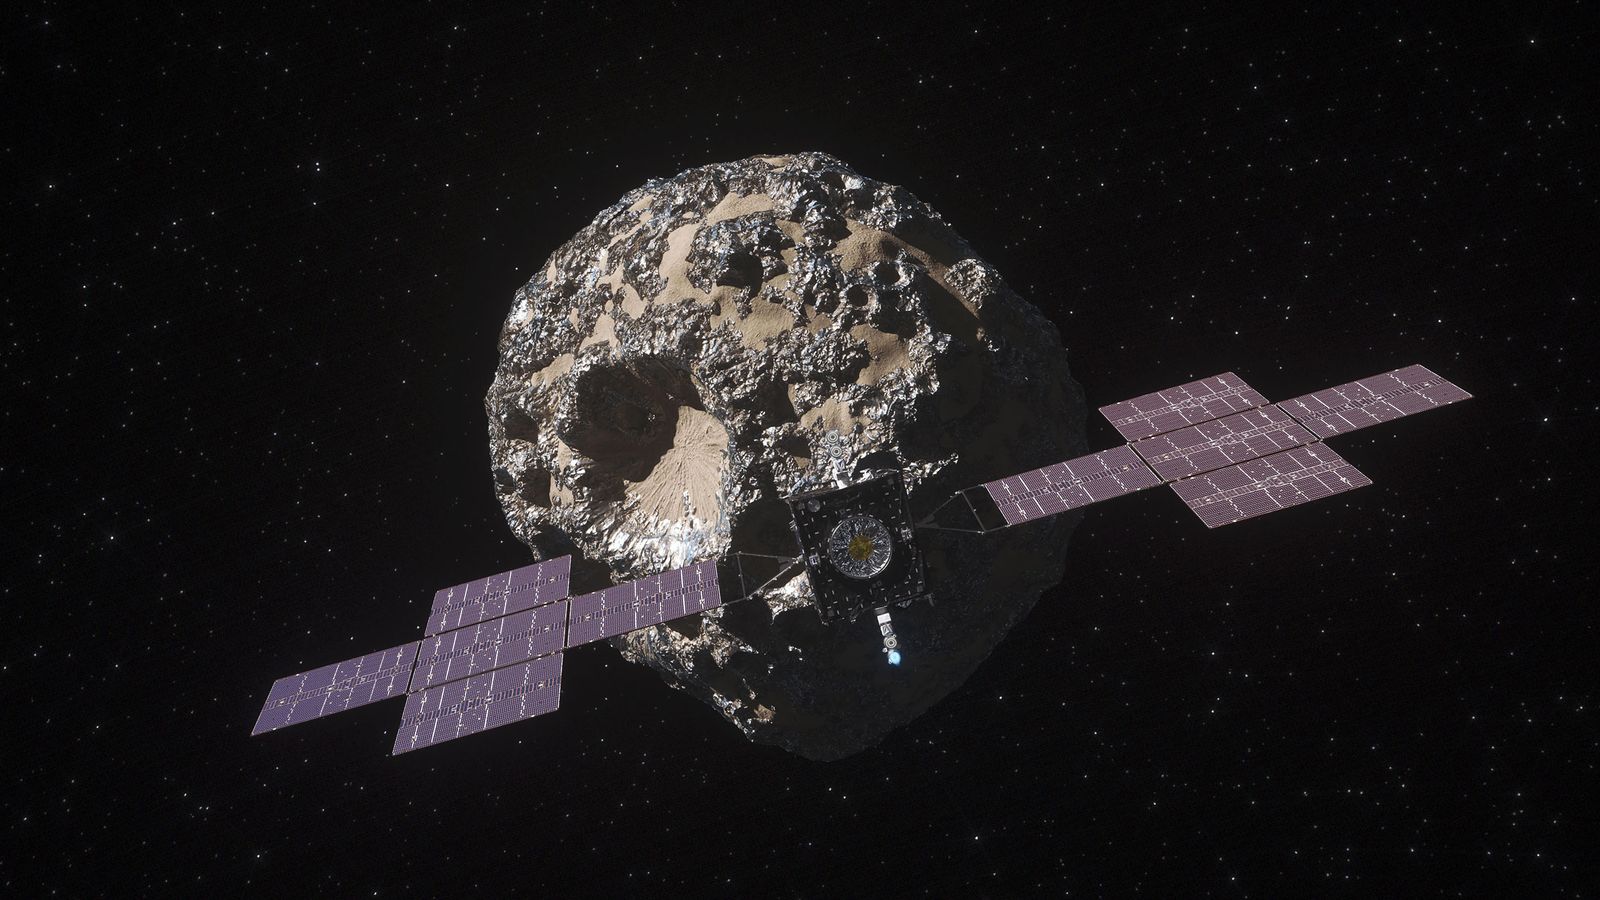 NASA to explore giant metal asteroid Psyche – here’s why it could reveal secrets about solar system | Science & Tech News